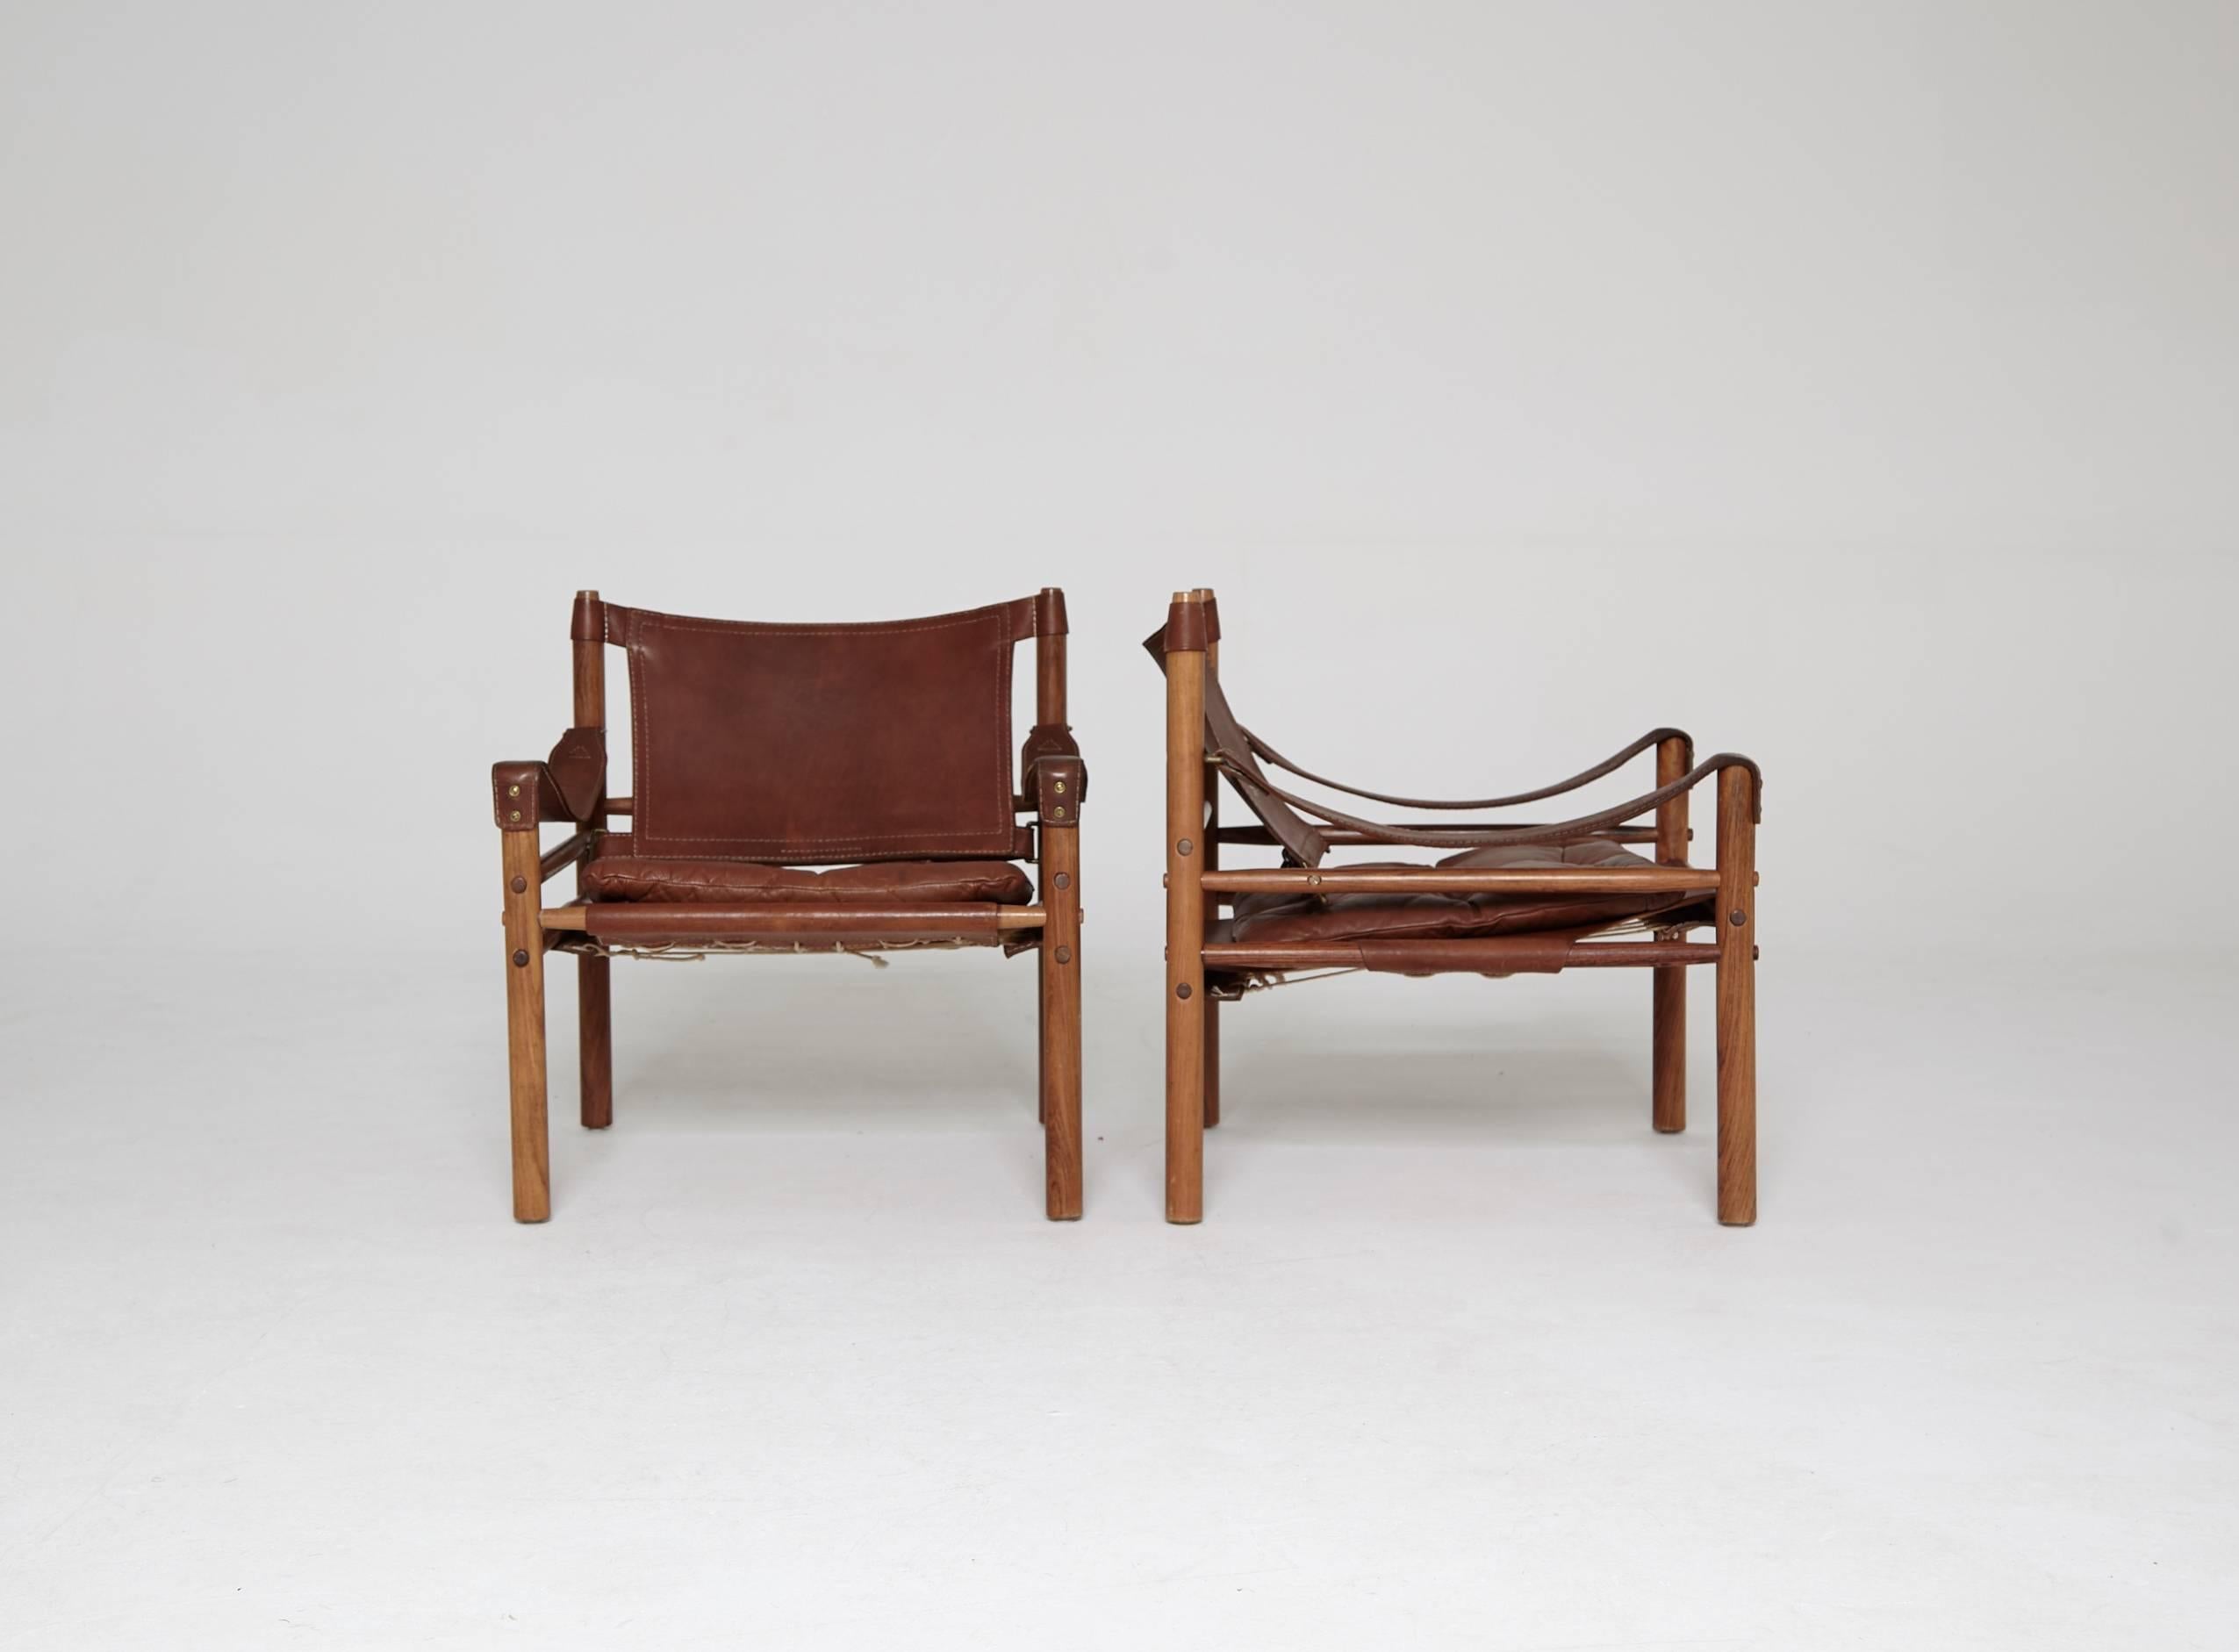 A stunning pair of authentic vintage Arne Norell safari sirocco chair in rosewood and brown leather. Made by Norell Mobler in Sweden. 

The chairs will need to be disassembled for shipping but were designed to be taken apart and put together again